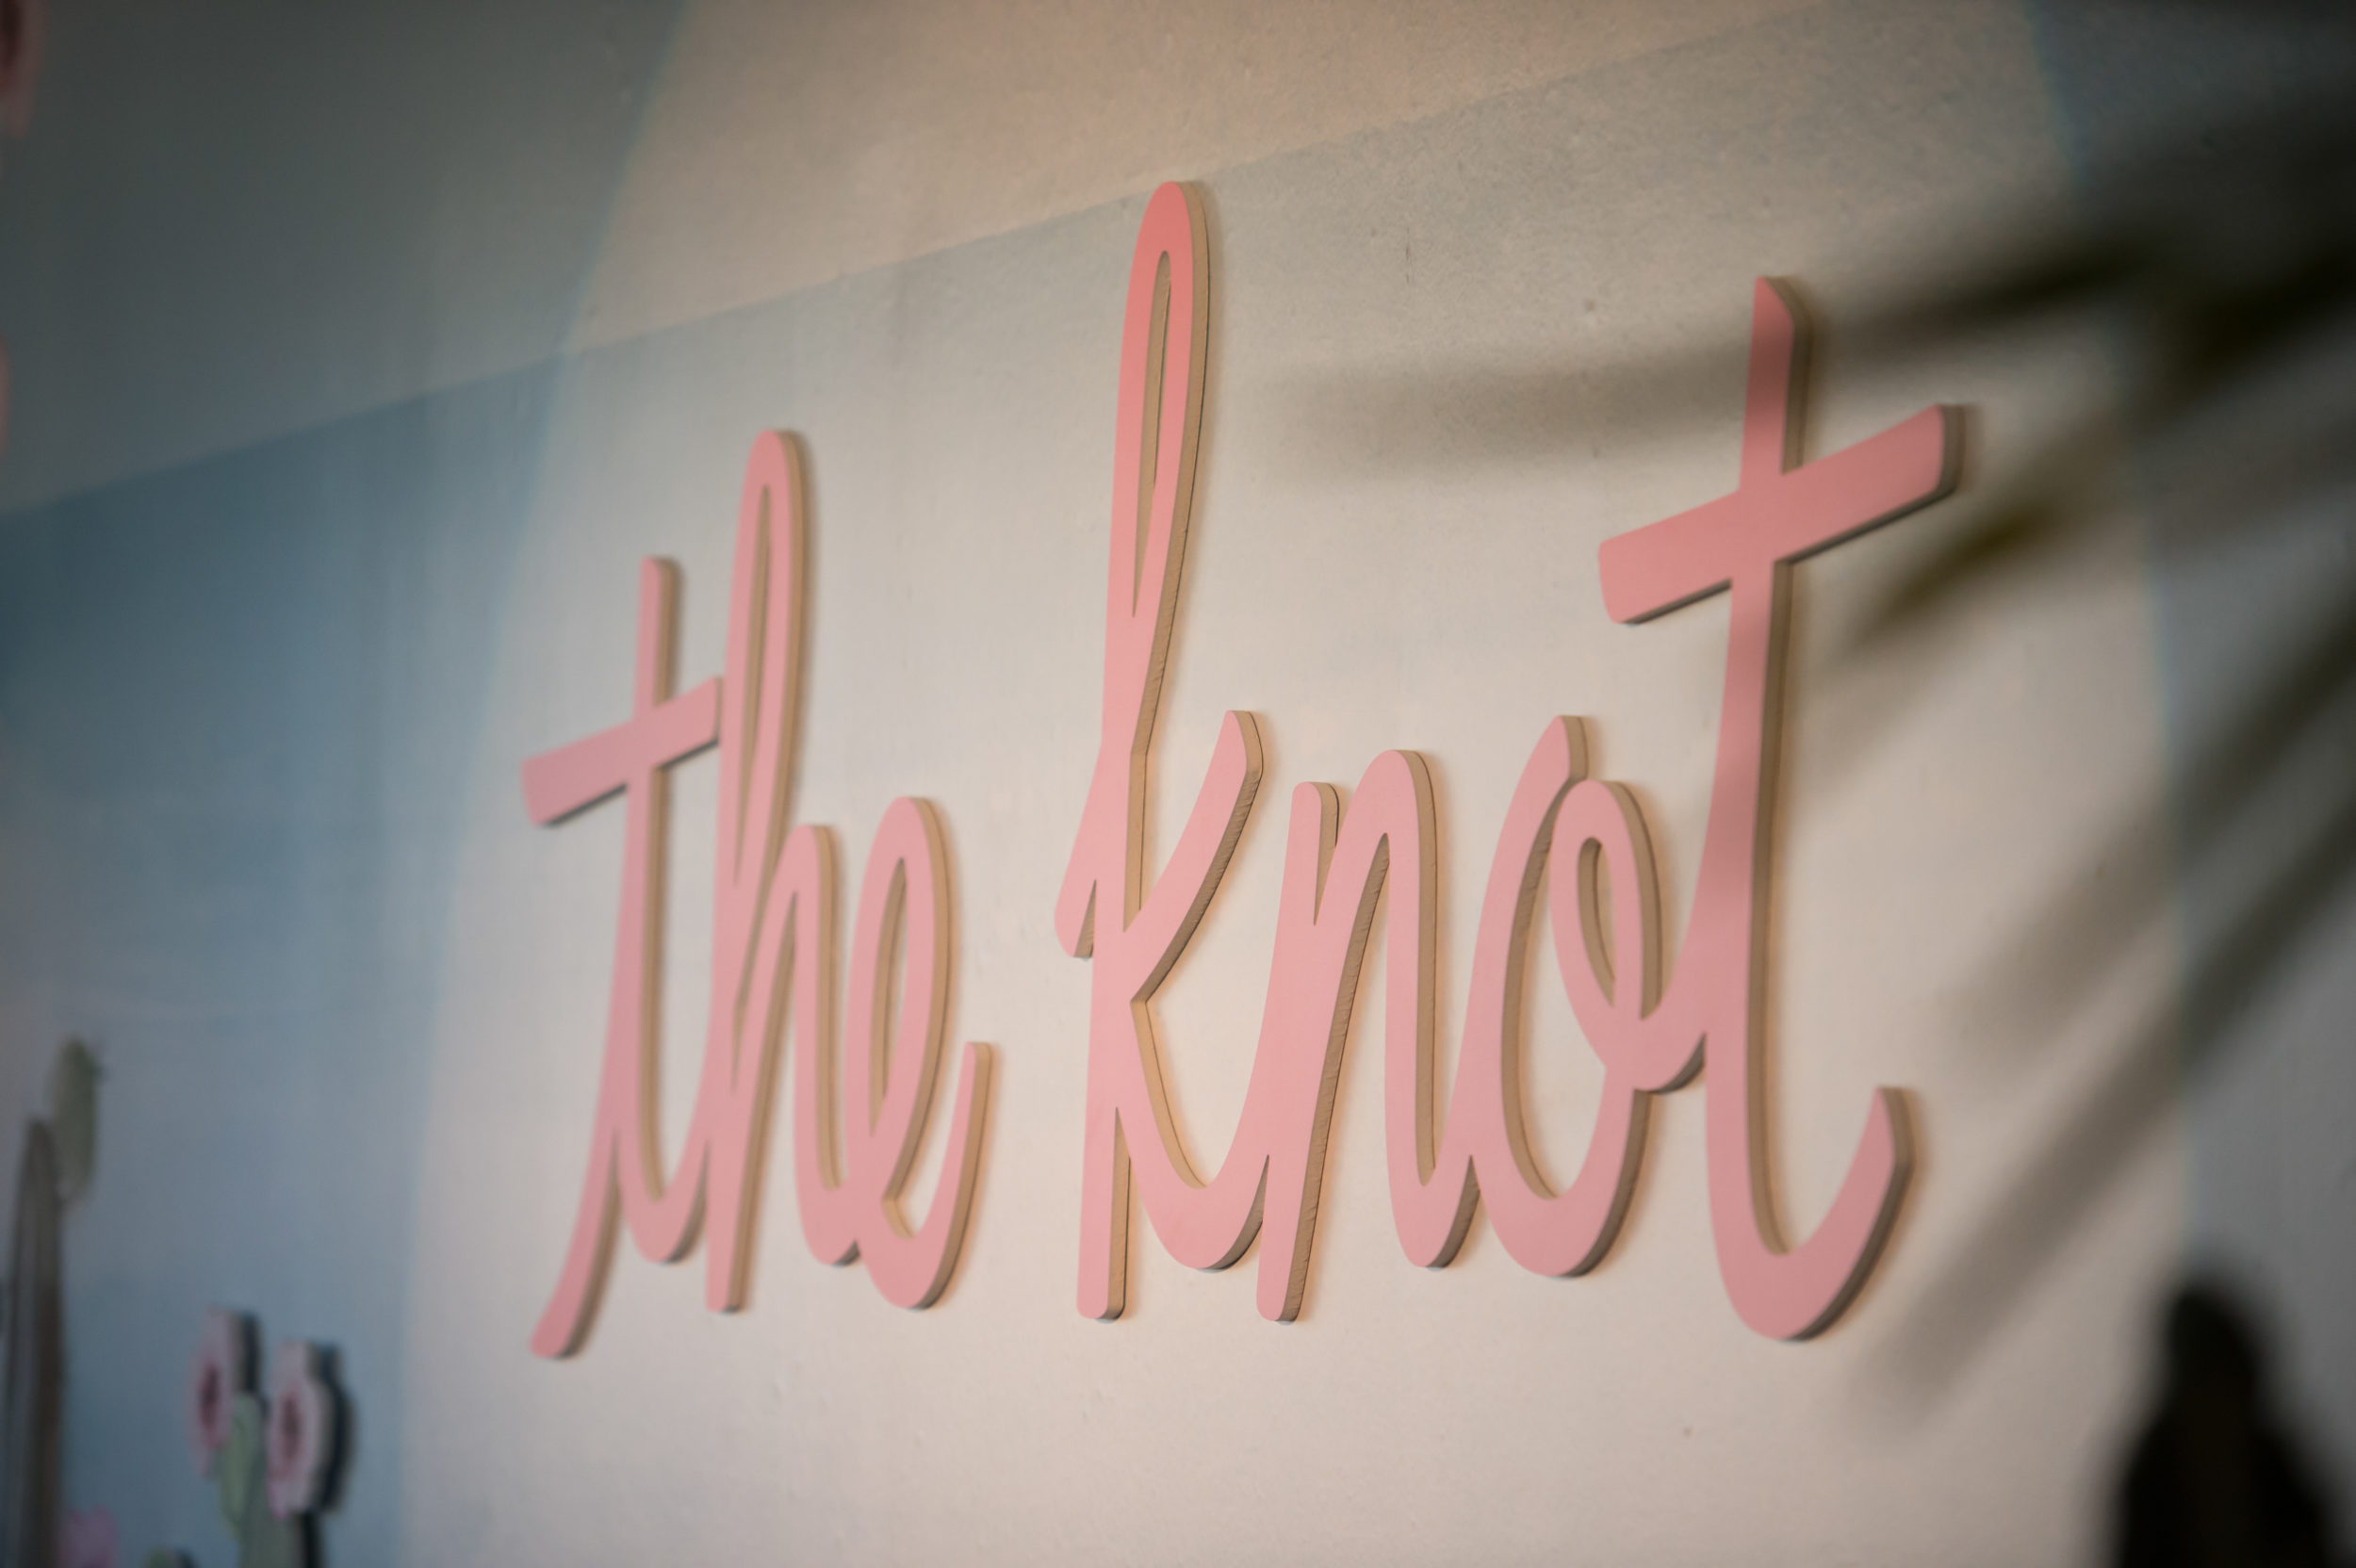 The Knot Event at the Hudson Loft